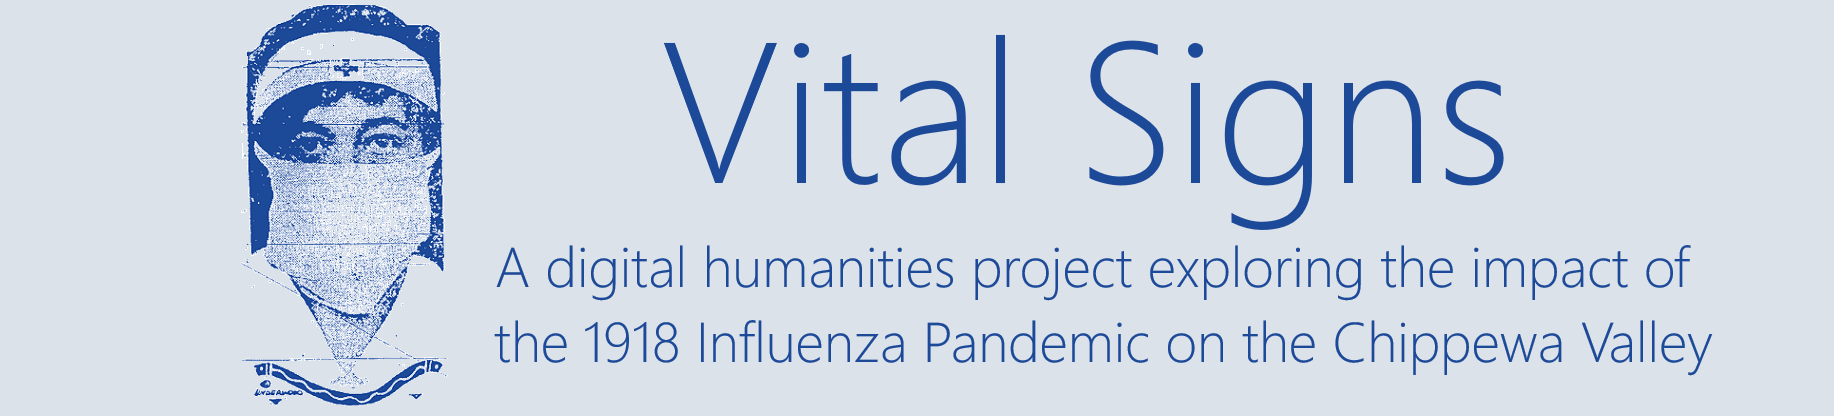 Vital Signs: The Chippewa Valley 1918 Influenza Project